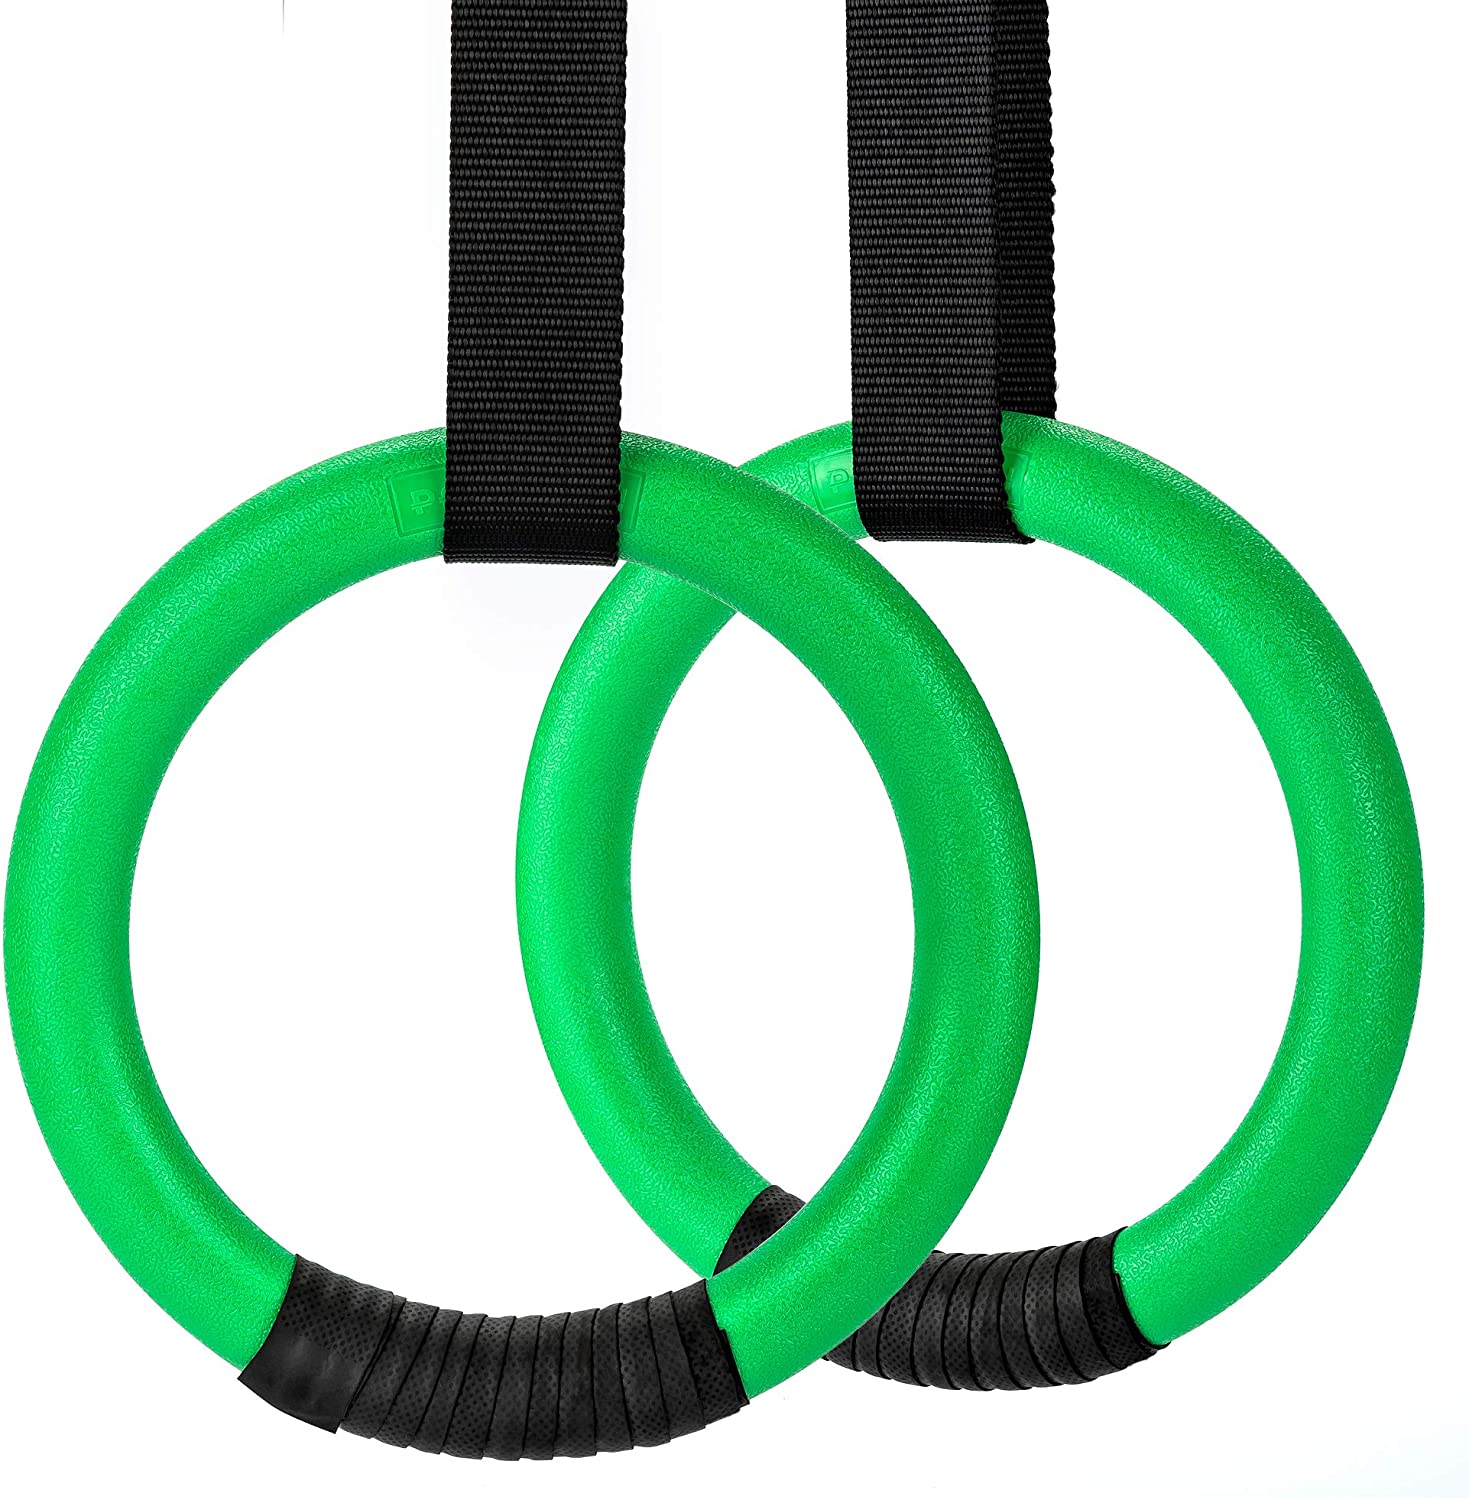 PACEARTH Gymnastic Rings 1100lbs Capacity with 14.76ft Adjustable...